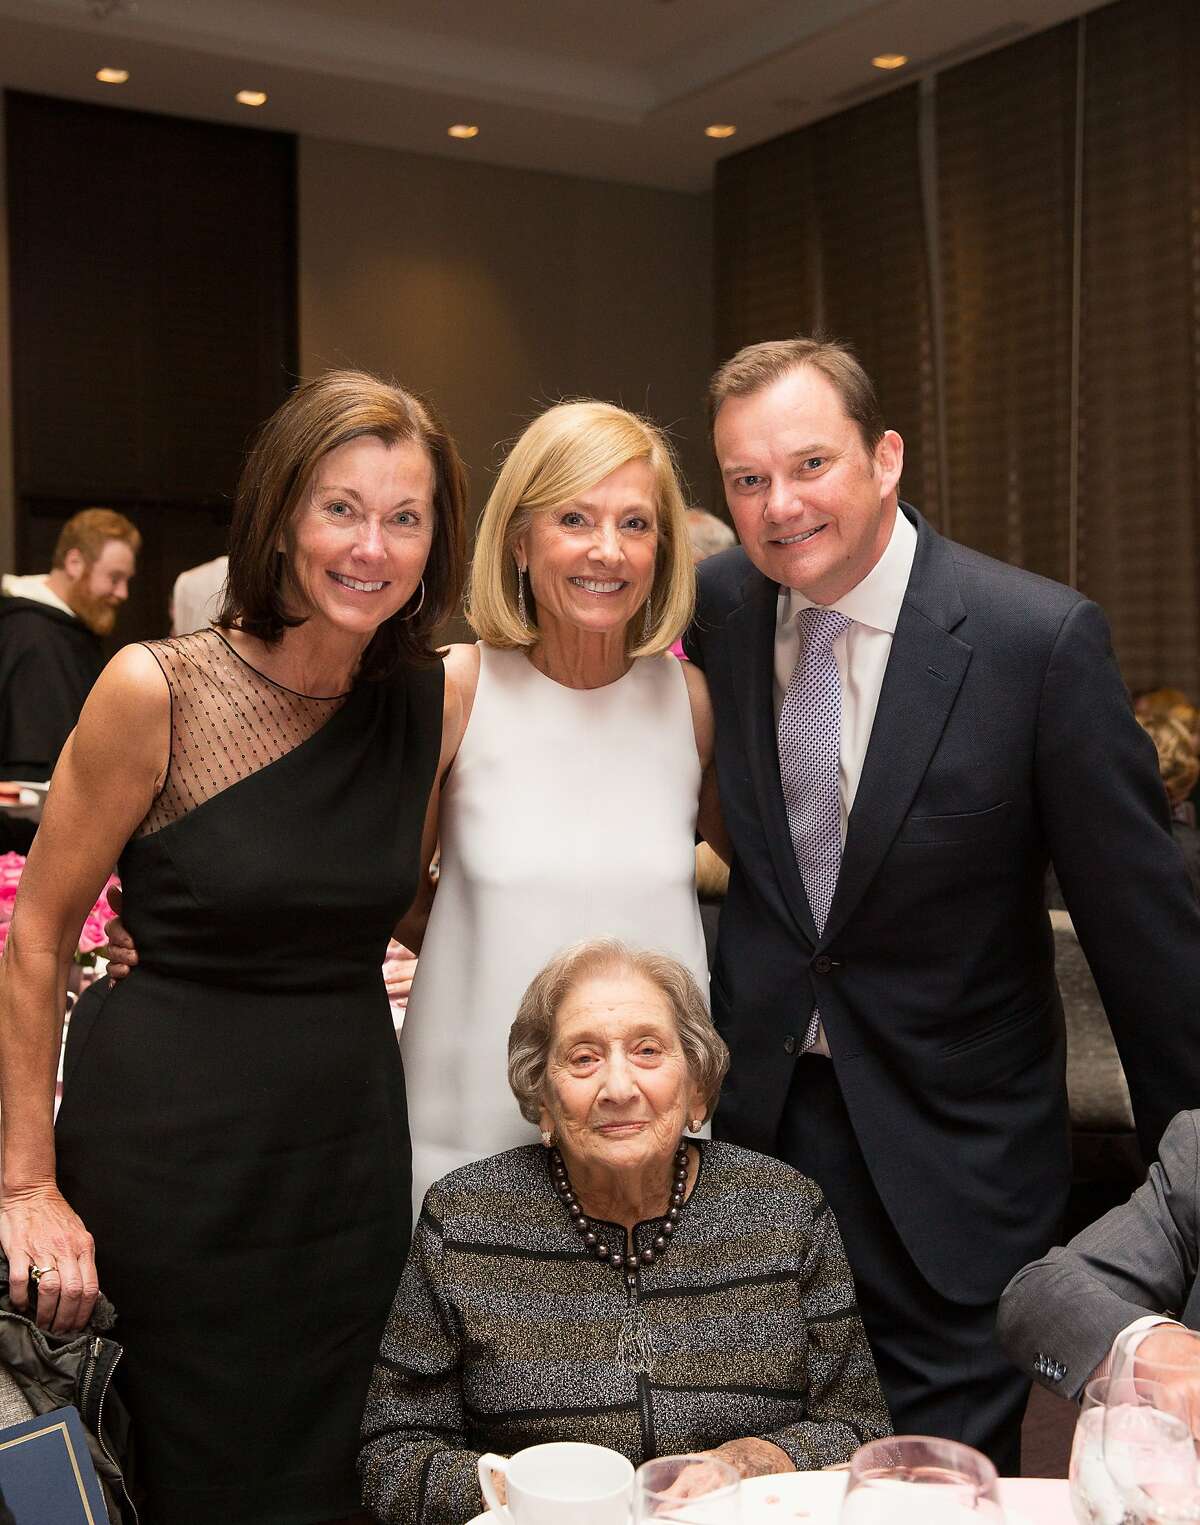 Cecilia Herbert (left) with Maureen Sullivan, CCCYO Board President Simon Manning and (seated) Rita Semel at the Loaves & Fishes Gala. April 2014. By Drew Altizer.